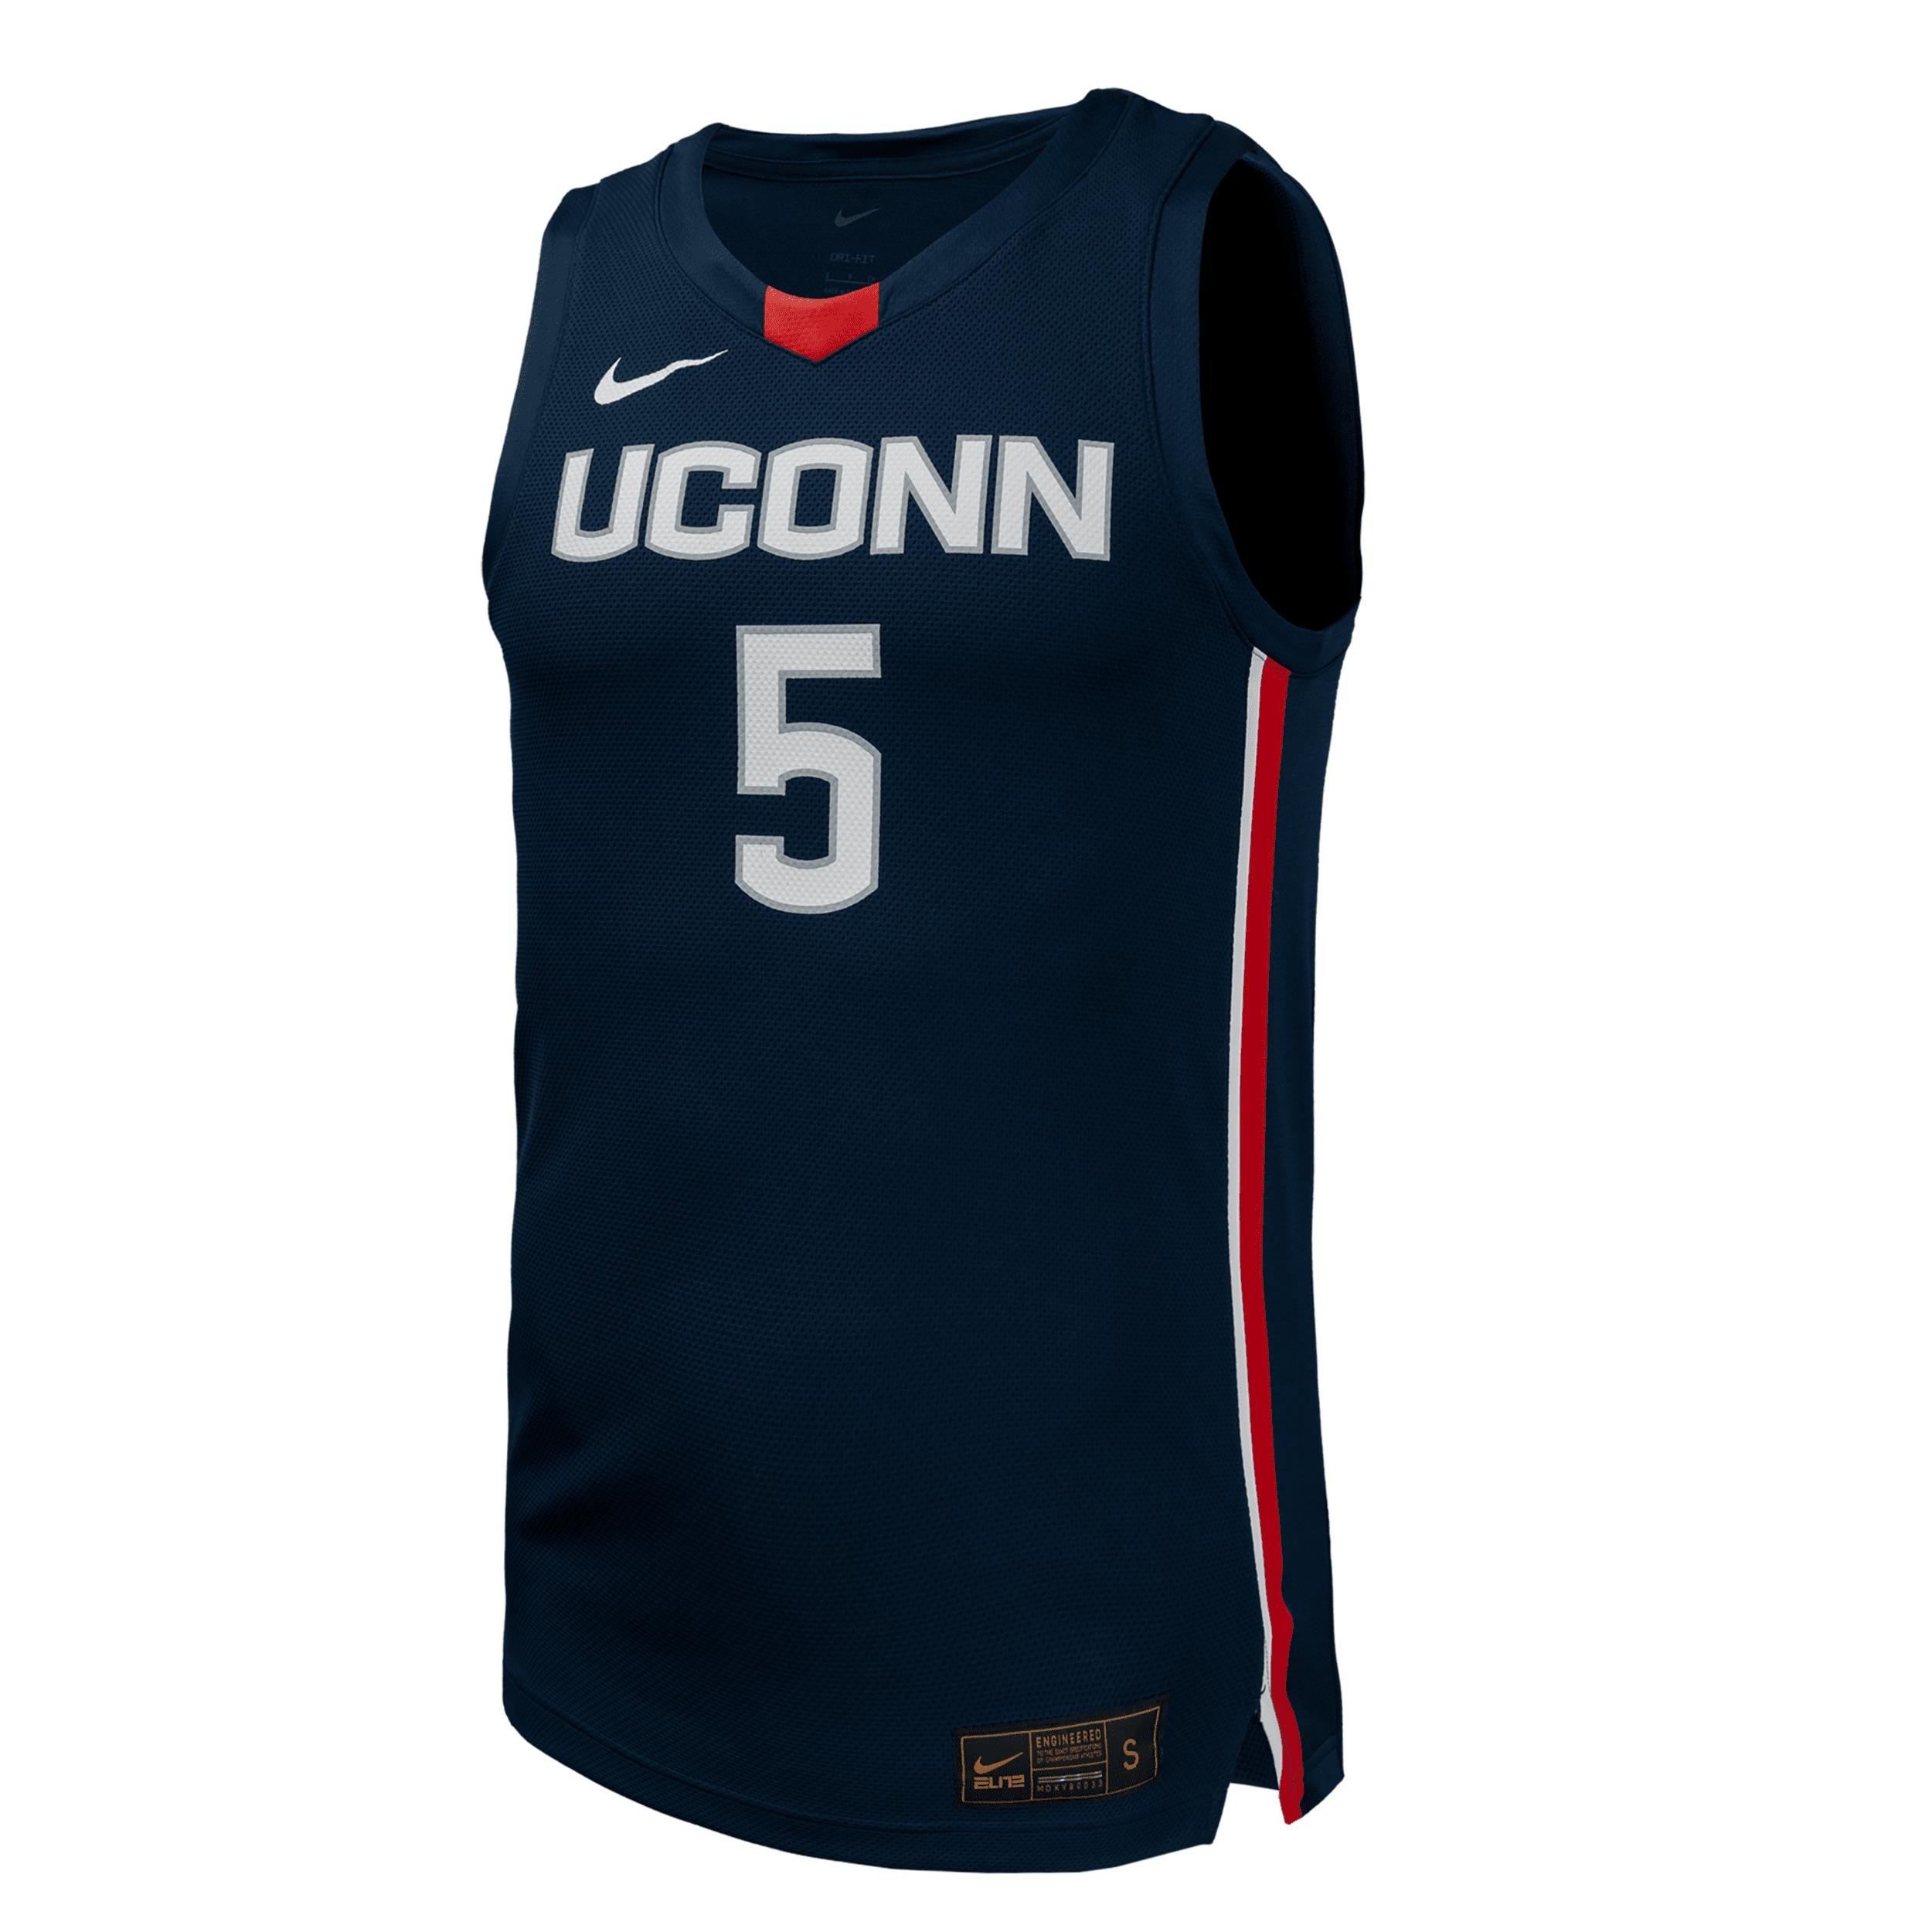 Paige Bueckers UConn 2023/24 Nike Unisex College Basketball Jersey by NIKE